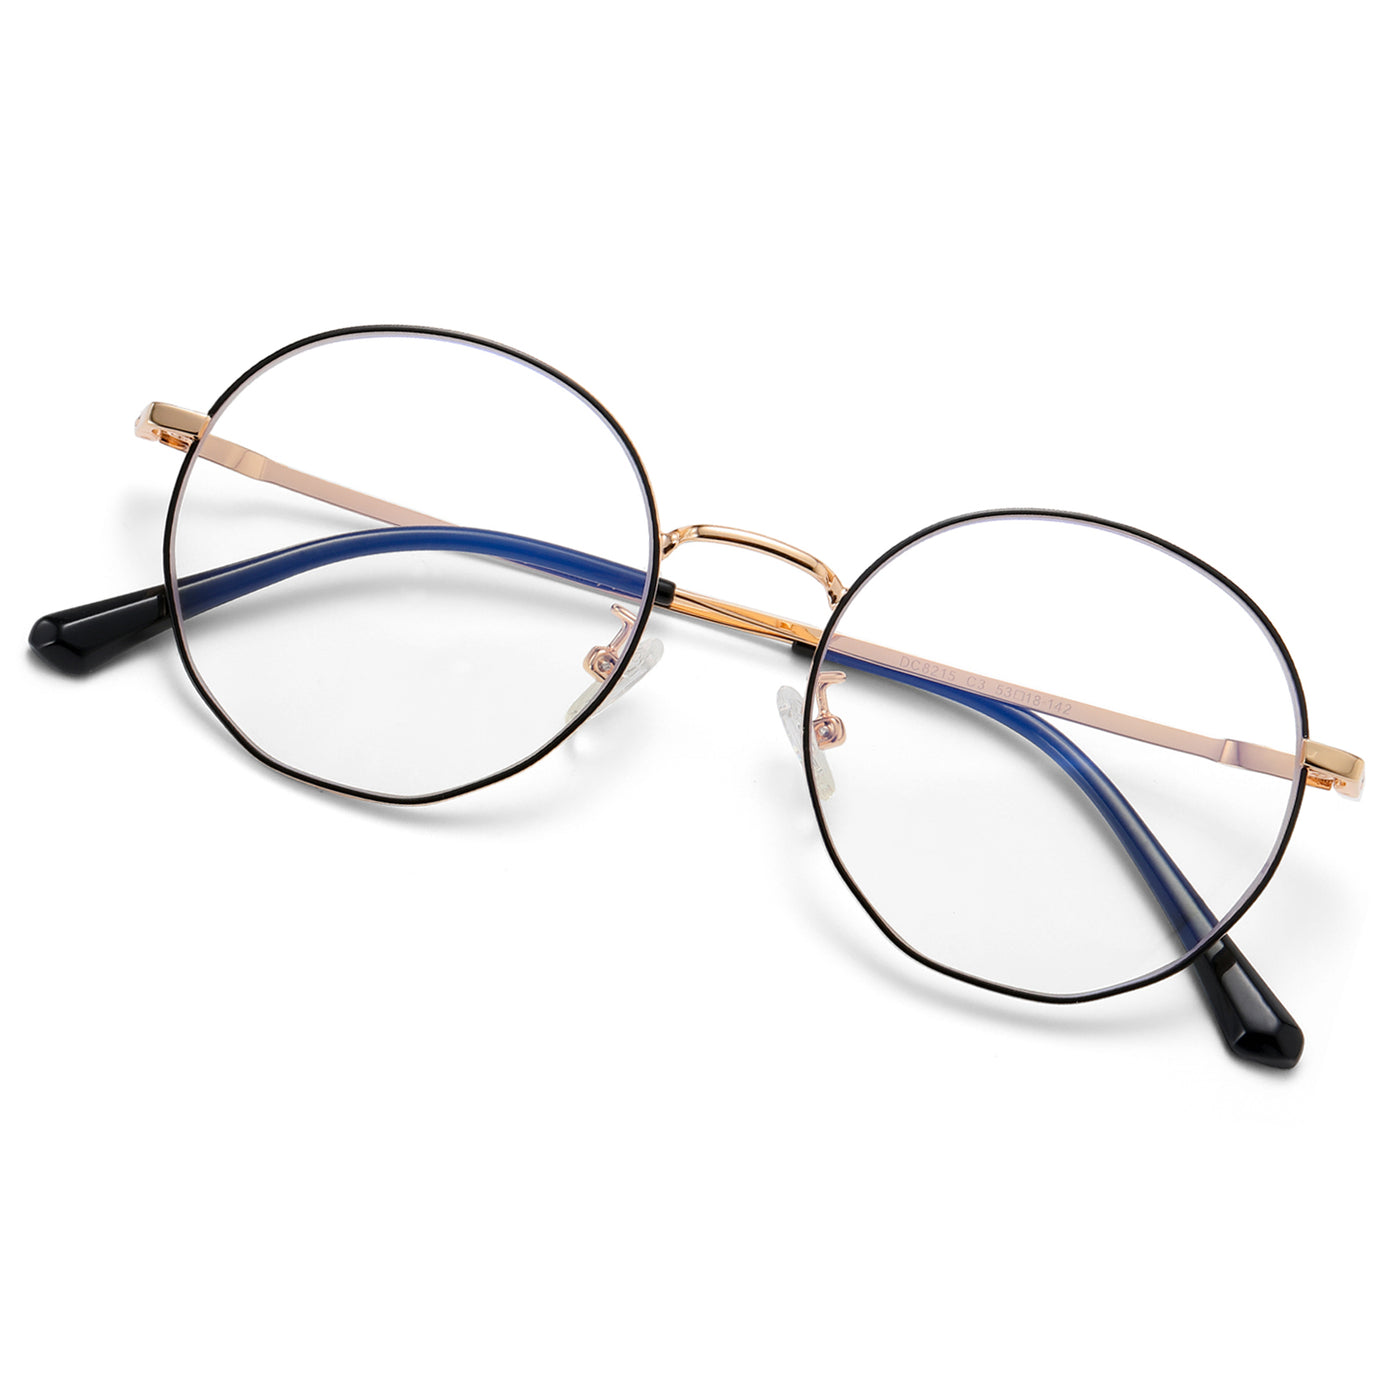 DUCO GLASSES-The right kind of shady Quinn Duco Blue light